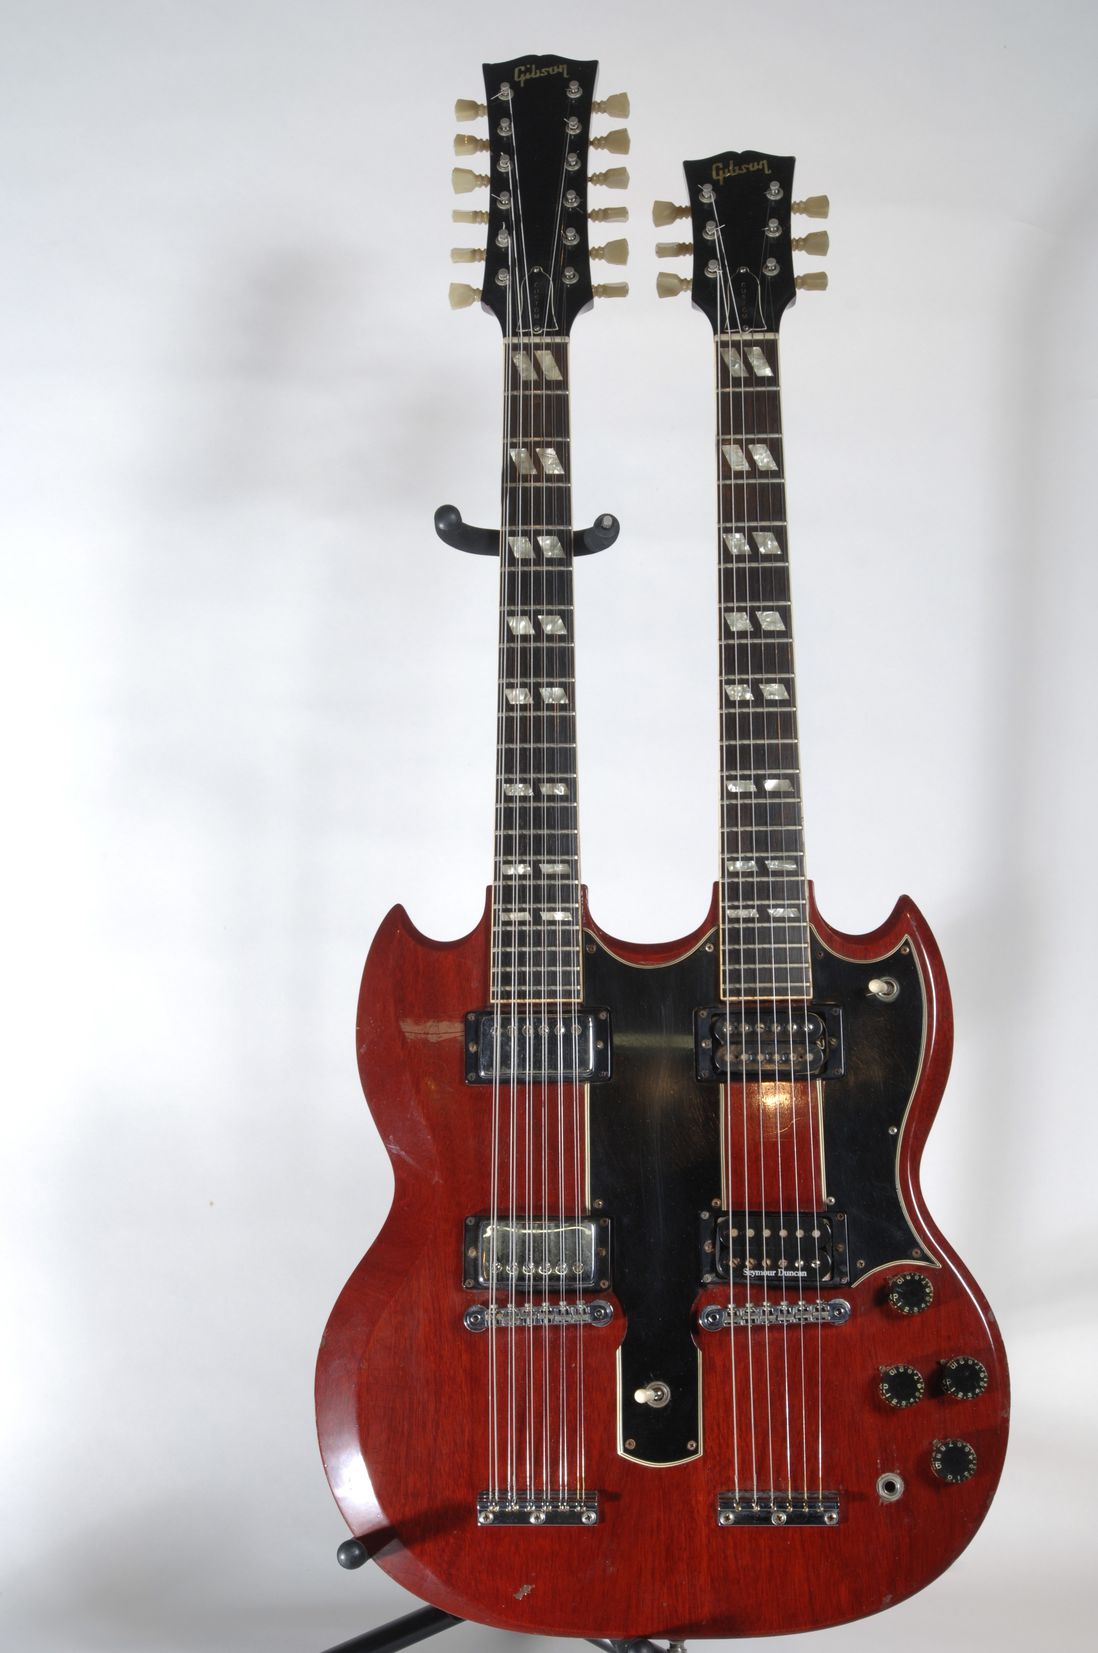 Jimmy Page's Gibson
EDS-1275 Double neck, which he used to play the acoustic and electric parts of the song “Stairway to Heaven” without needing to change instruments.  It was also used on “The Rain Song,” “Celebration Day,” and “The Song Remains the Same."